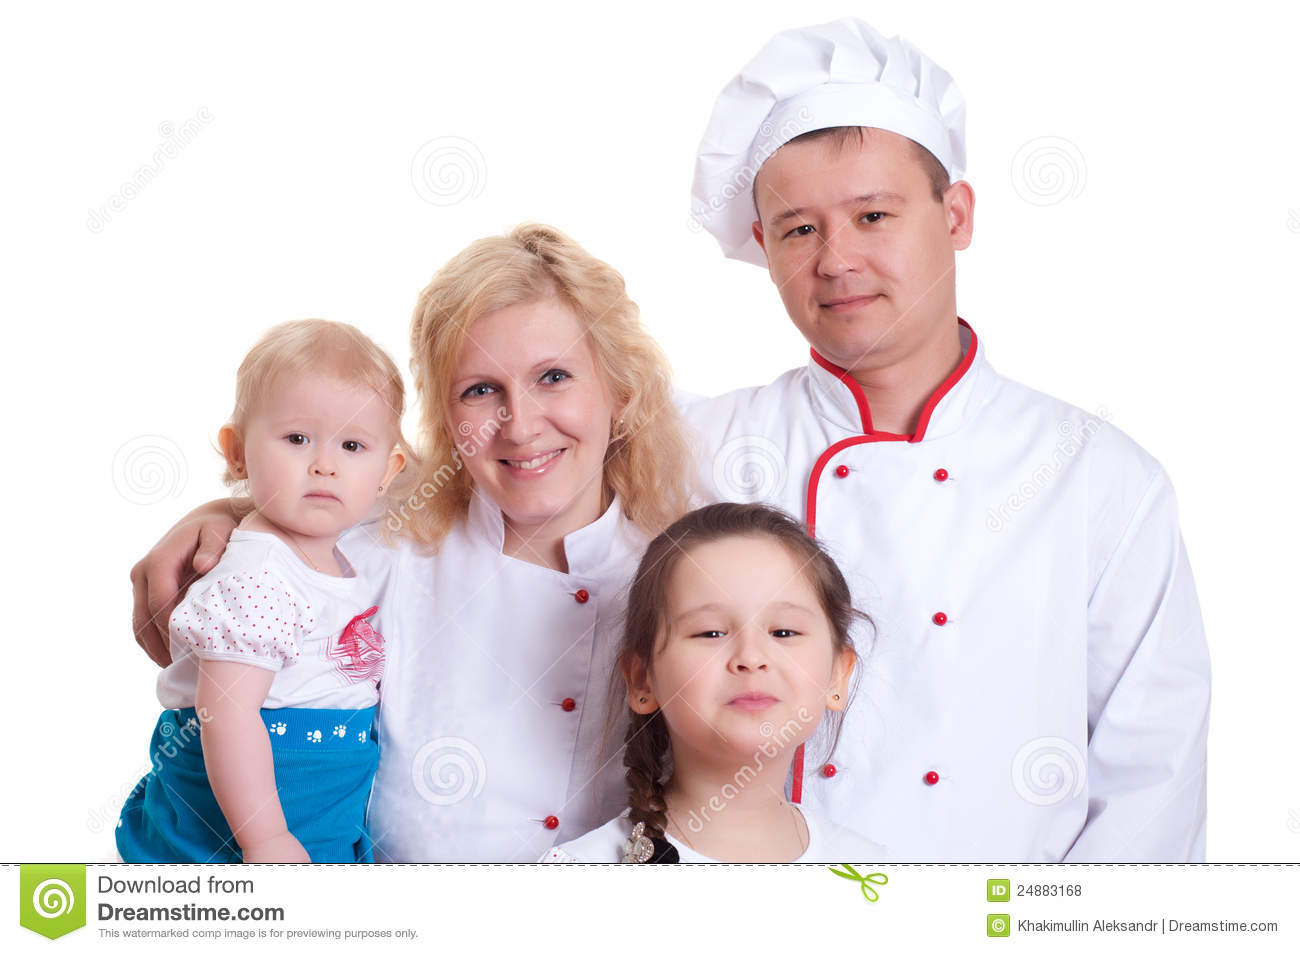 Free Stock Photos of Families Cooking